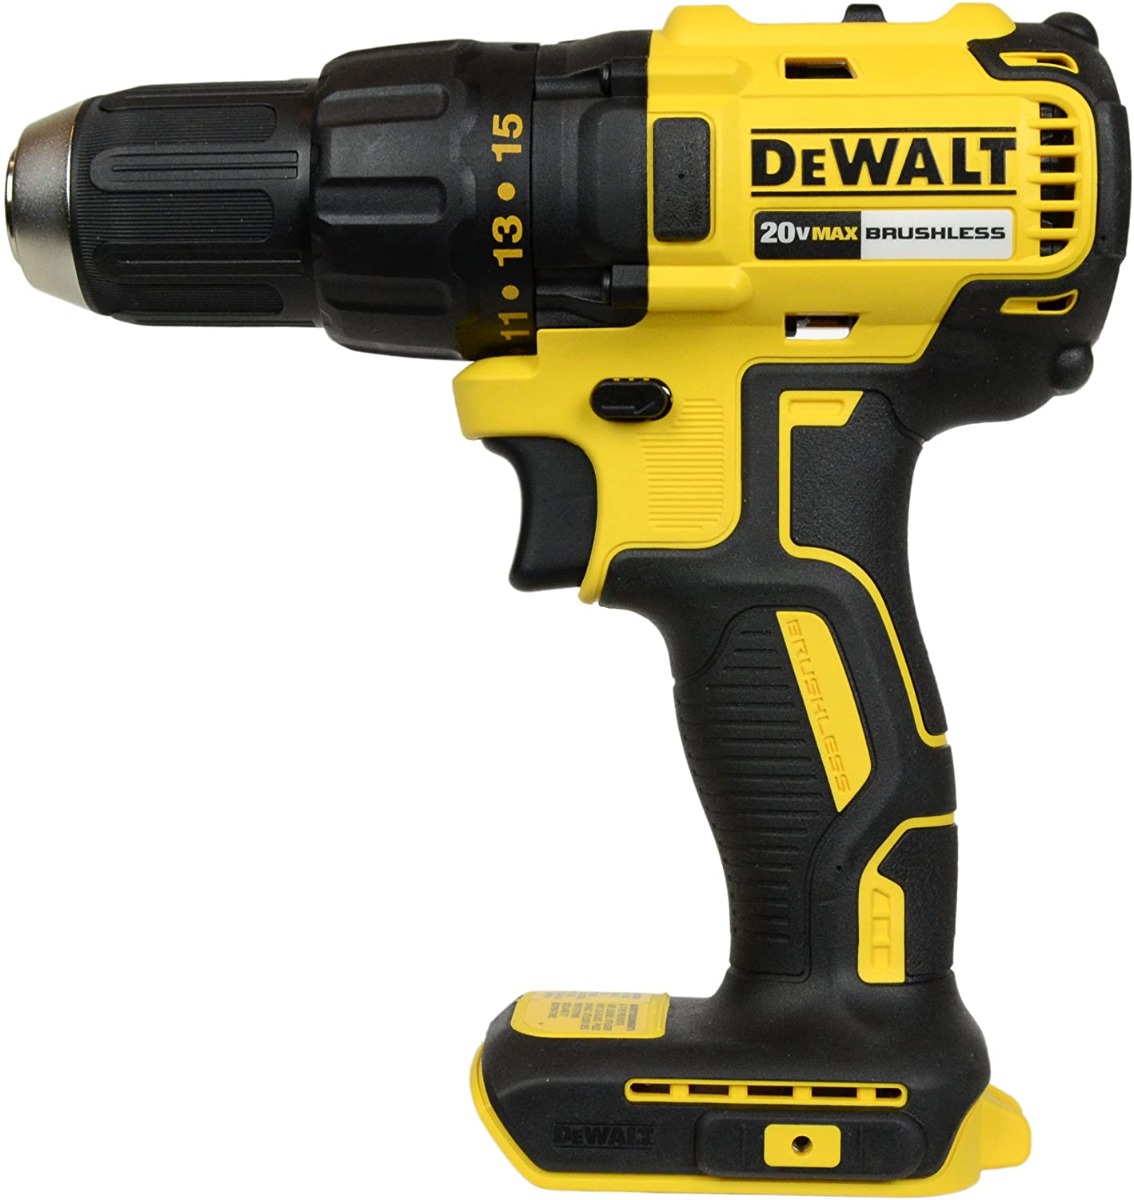 DeWALT DCD777 DCD777B 20V 1/2-Inch Brushless Drill Driver (Bare Tool Only - Battery and Charger Not Included)